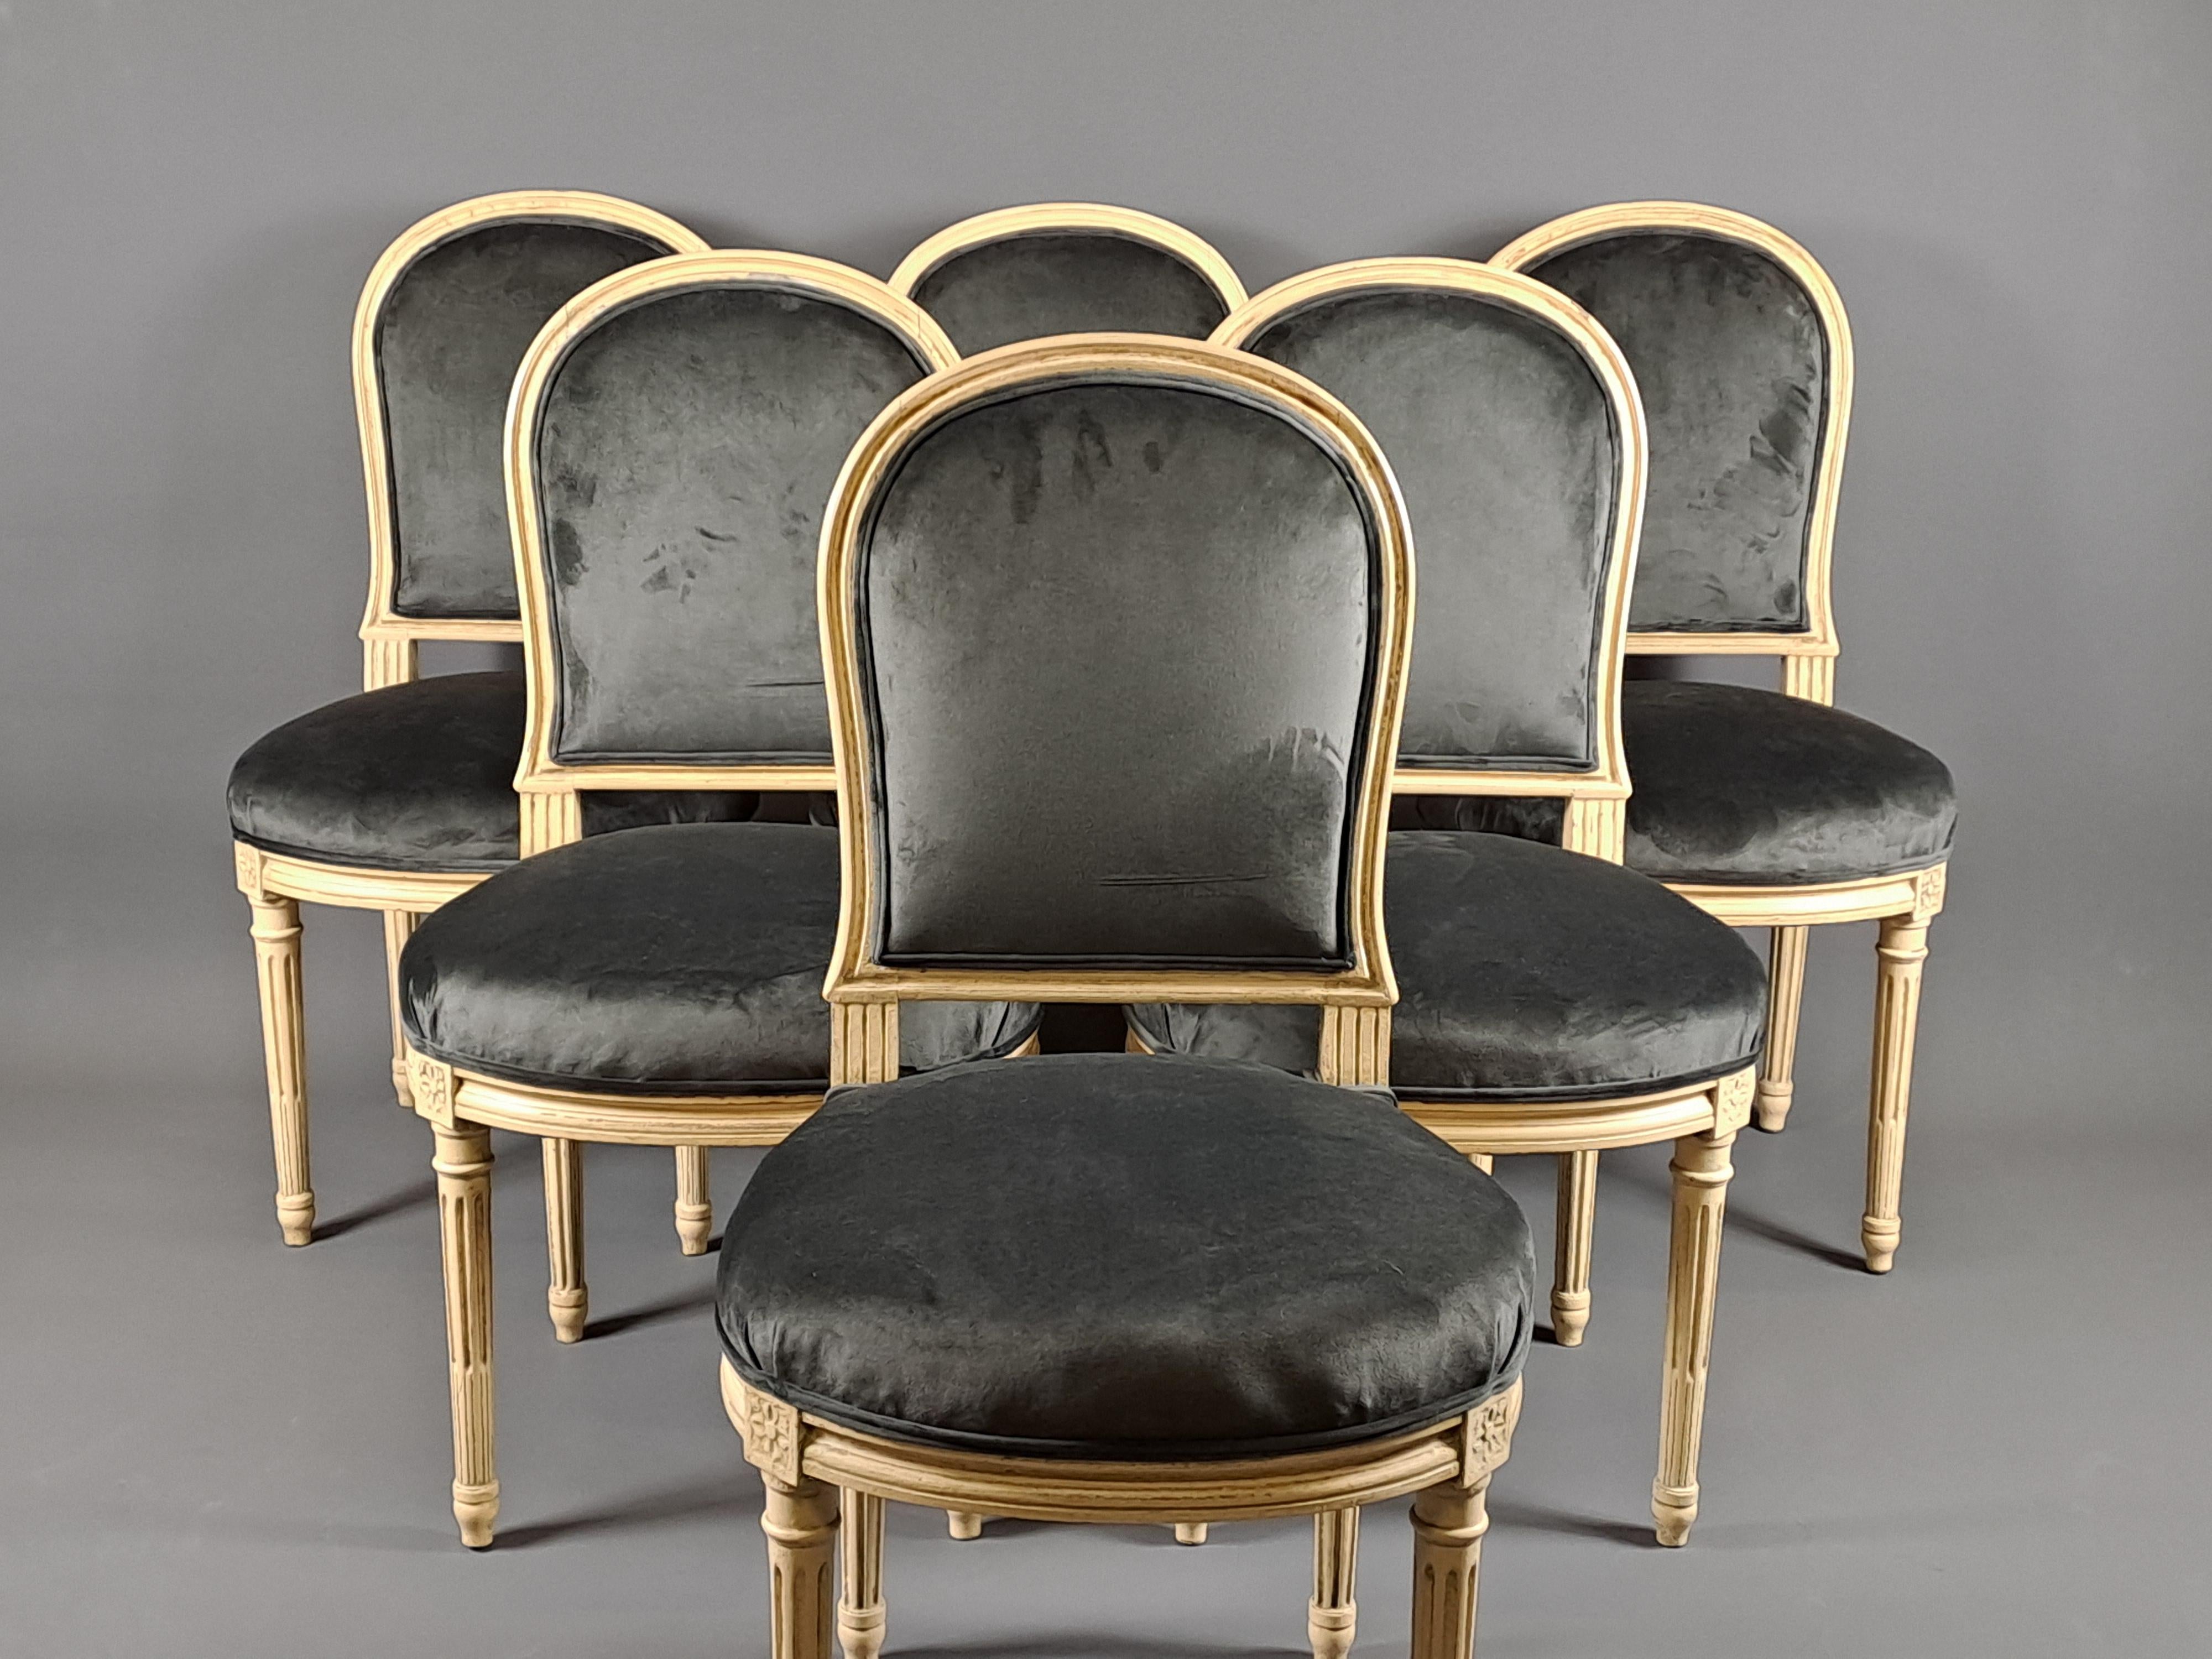 Set of 6 Louis XVI style chairs in cream lacquered wood after a model by Jacob with hot air balloon-shaped backrest and large oblong seat.

The fabric has been changed by our upholstery, satin velvet style fabric in taupe brown color (we can send